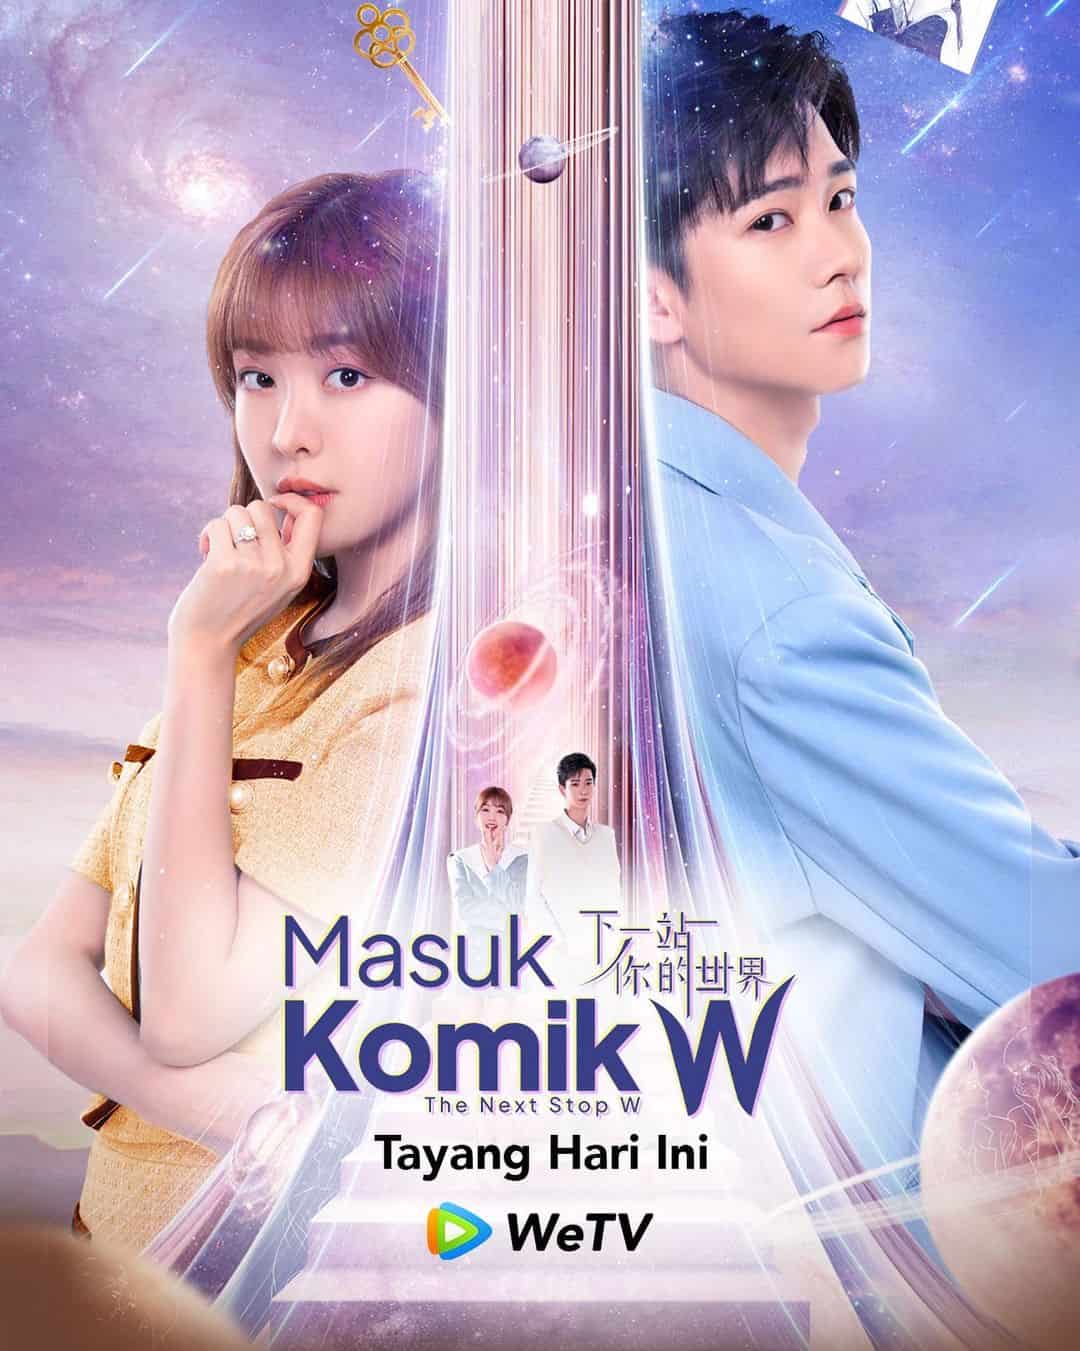 Next Stop W - Sinopsis, Pemain, OST, Episode, Review